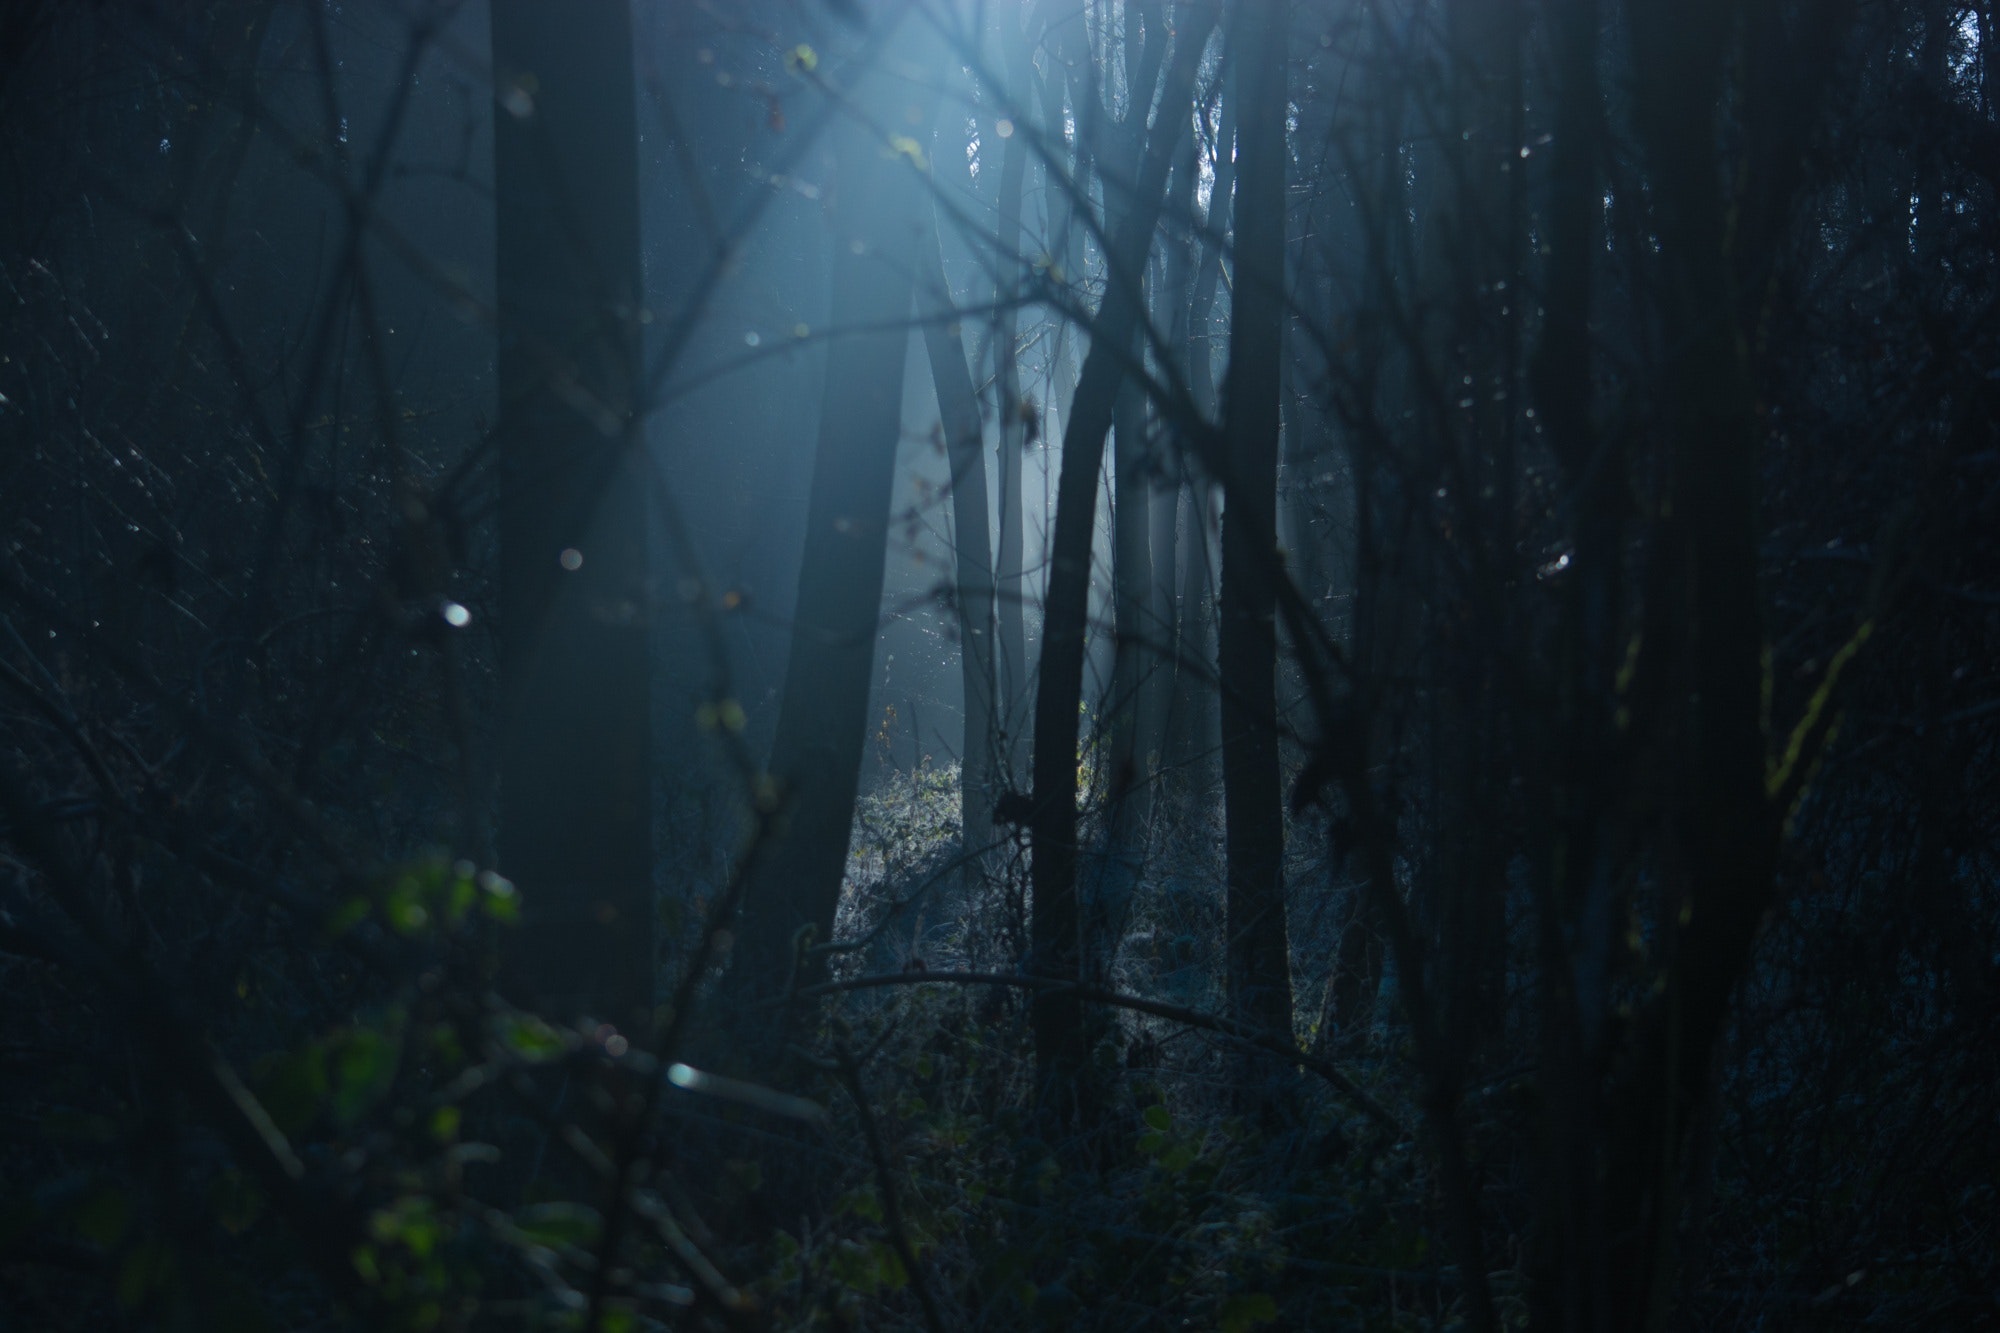 A photograph of moody wood mostly shrouded in darkness.